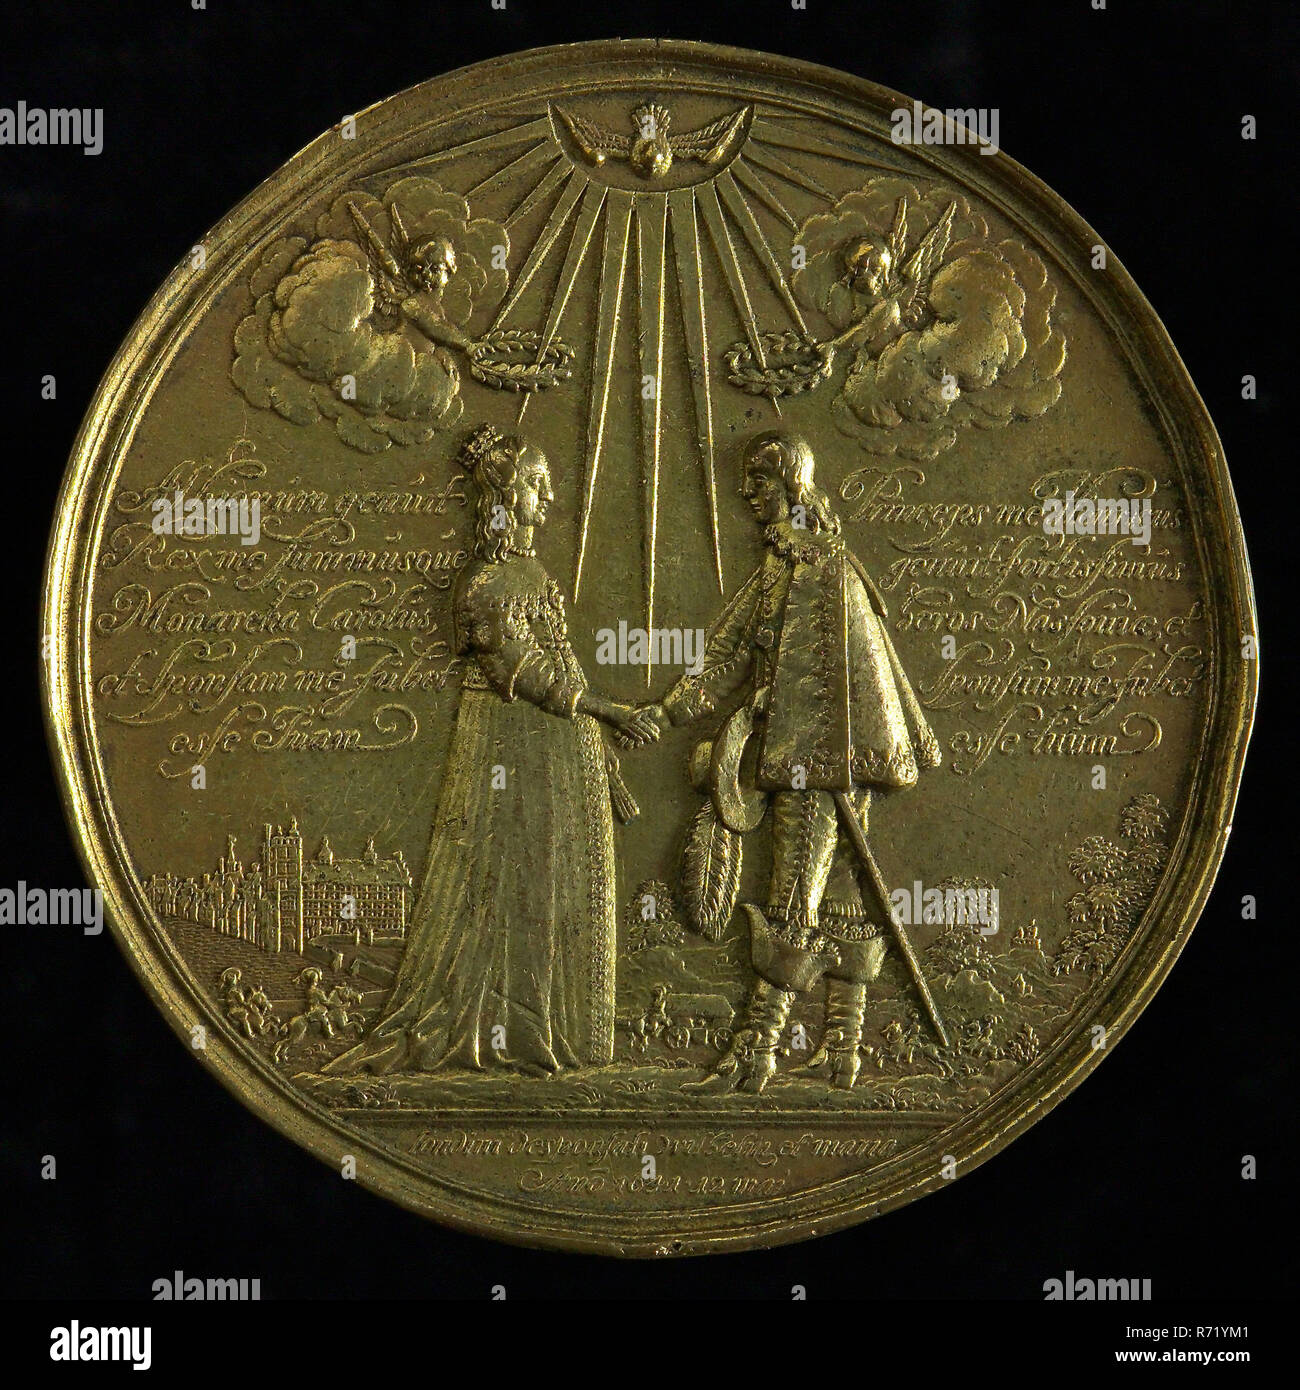 J. Blum, Medal on the wedding of Prince William II and Mary of England, wedding medal medallion medal brass, the bridal couple reaches out to each other in the background the Vijverberg in The Hague Text in the field on the right and in the cut, Princeps me henricus genuit fortissimus heros Nassaviae et sponsum me jubet esse tuum (Prince Henry the wave hero of Nassau has cultivated me and arranged for your bridegroom) Albionum genuit Rex me summsque Monarcha Carolus et sponsored me jubet esse tuam (The King of the English and supreme prince Karel has cultivated me and arranged for your wide )  Stock Photo